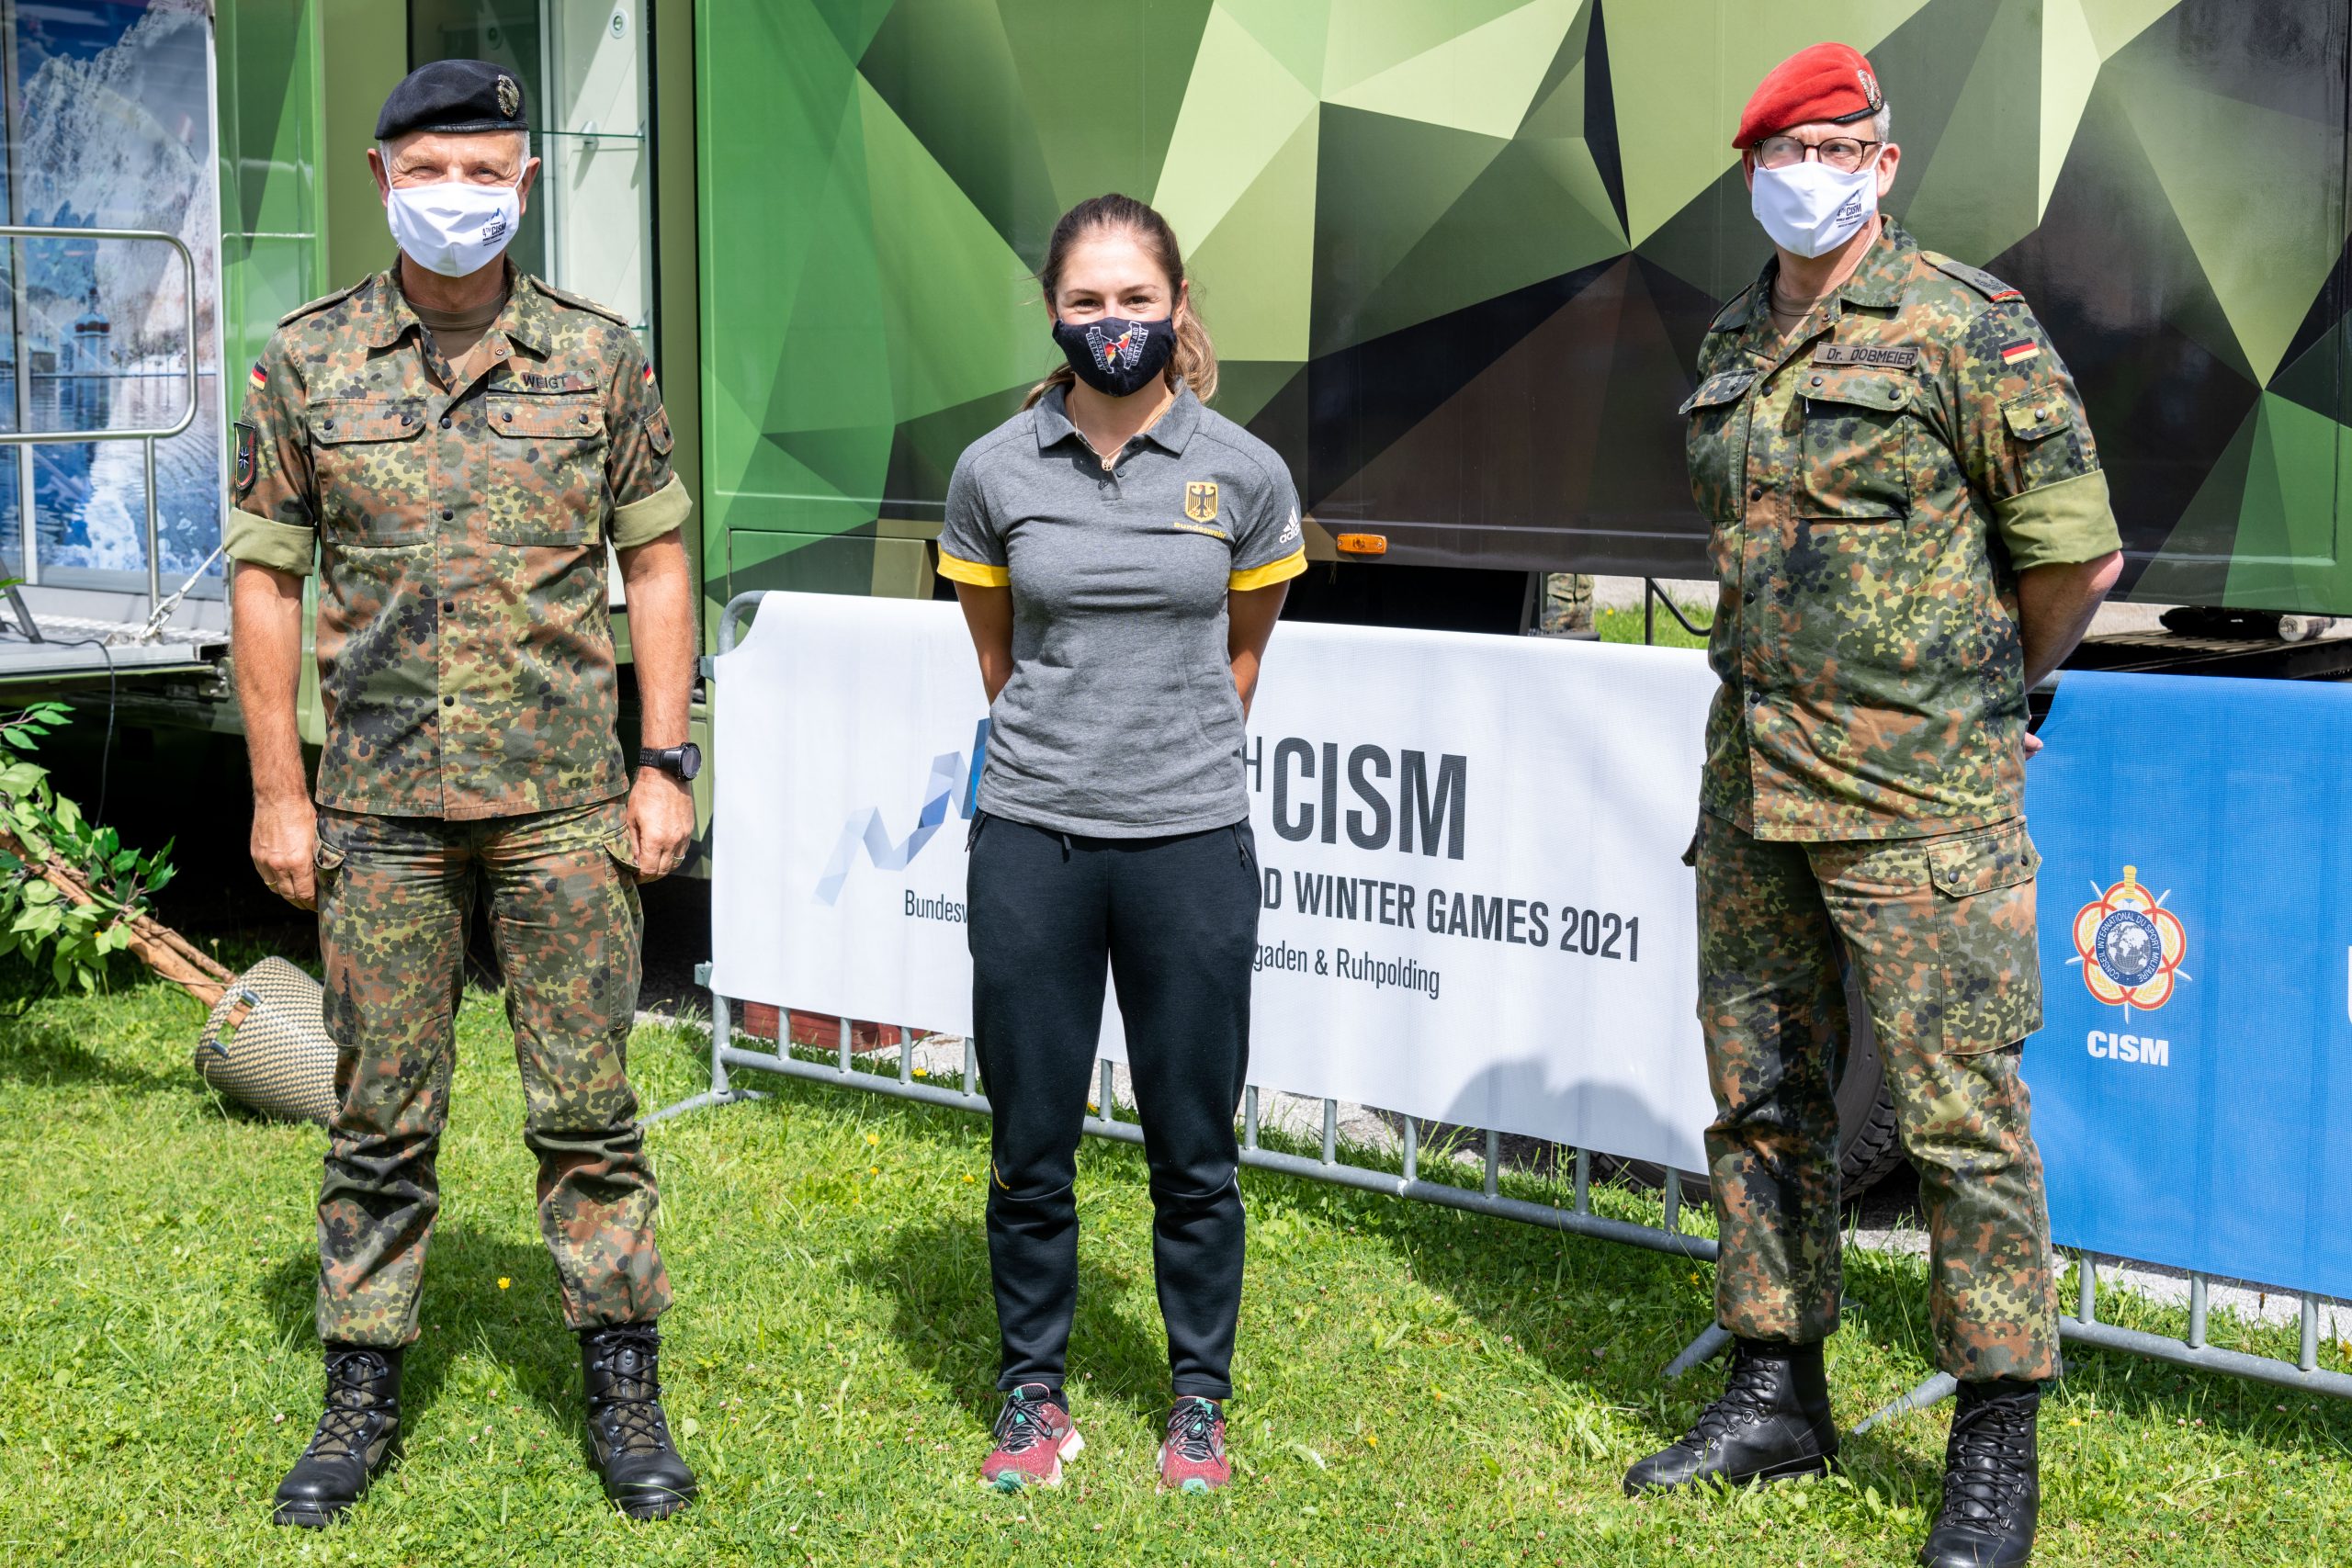 Lieutenant General Weigt, Sergeant Langenhorst and Lieutenant Colonel Dr. Dobmeier standing side by side, all with masks on, but optimistic about the future